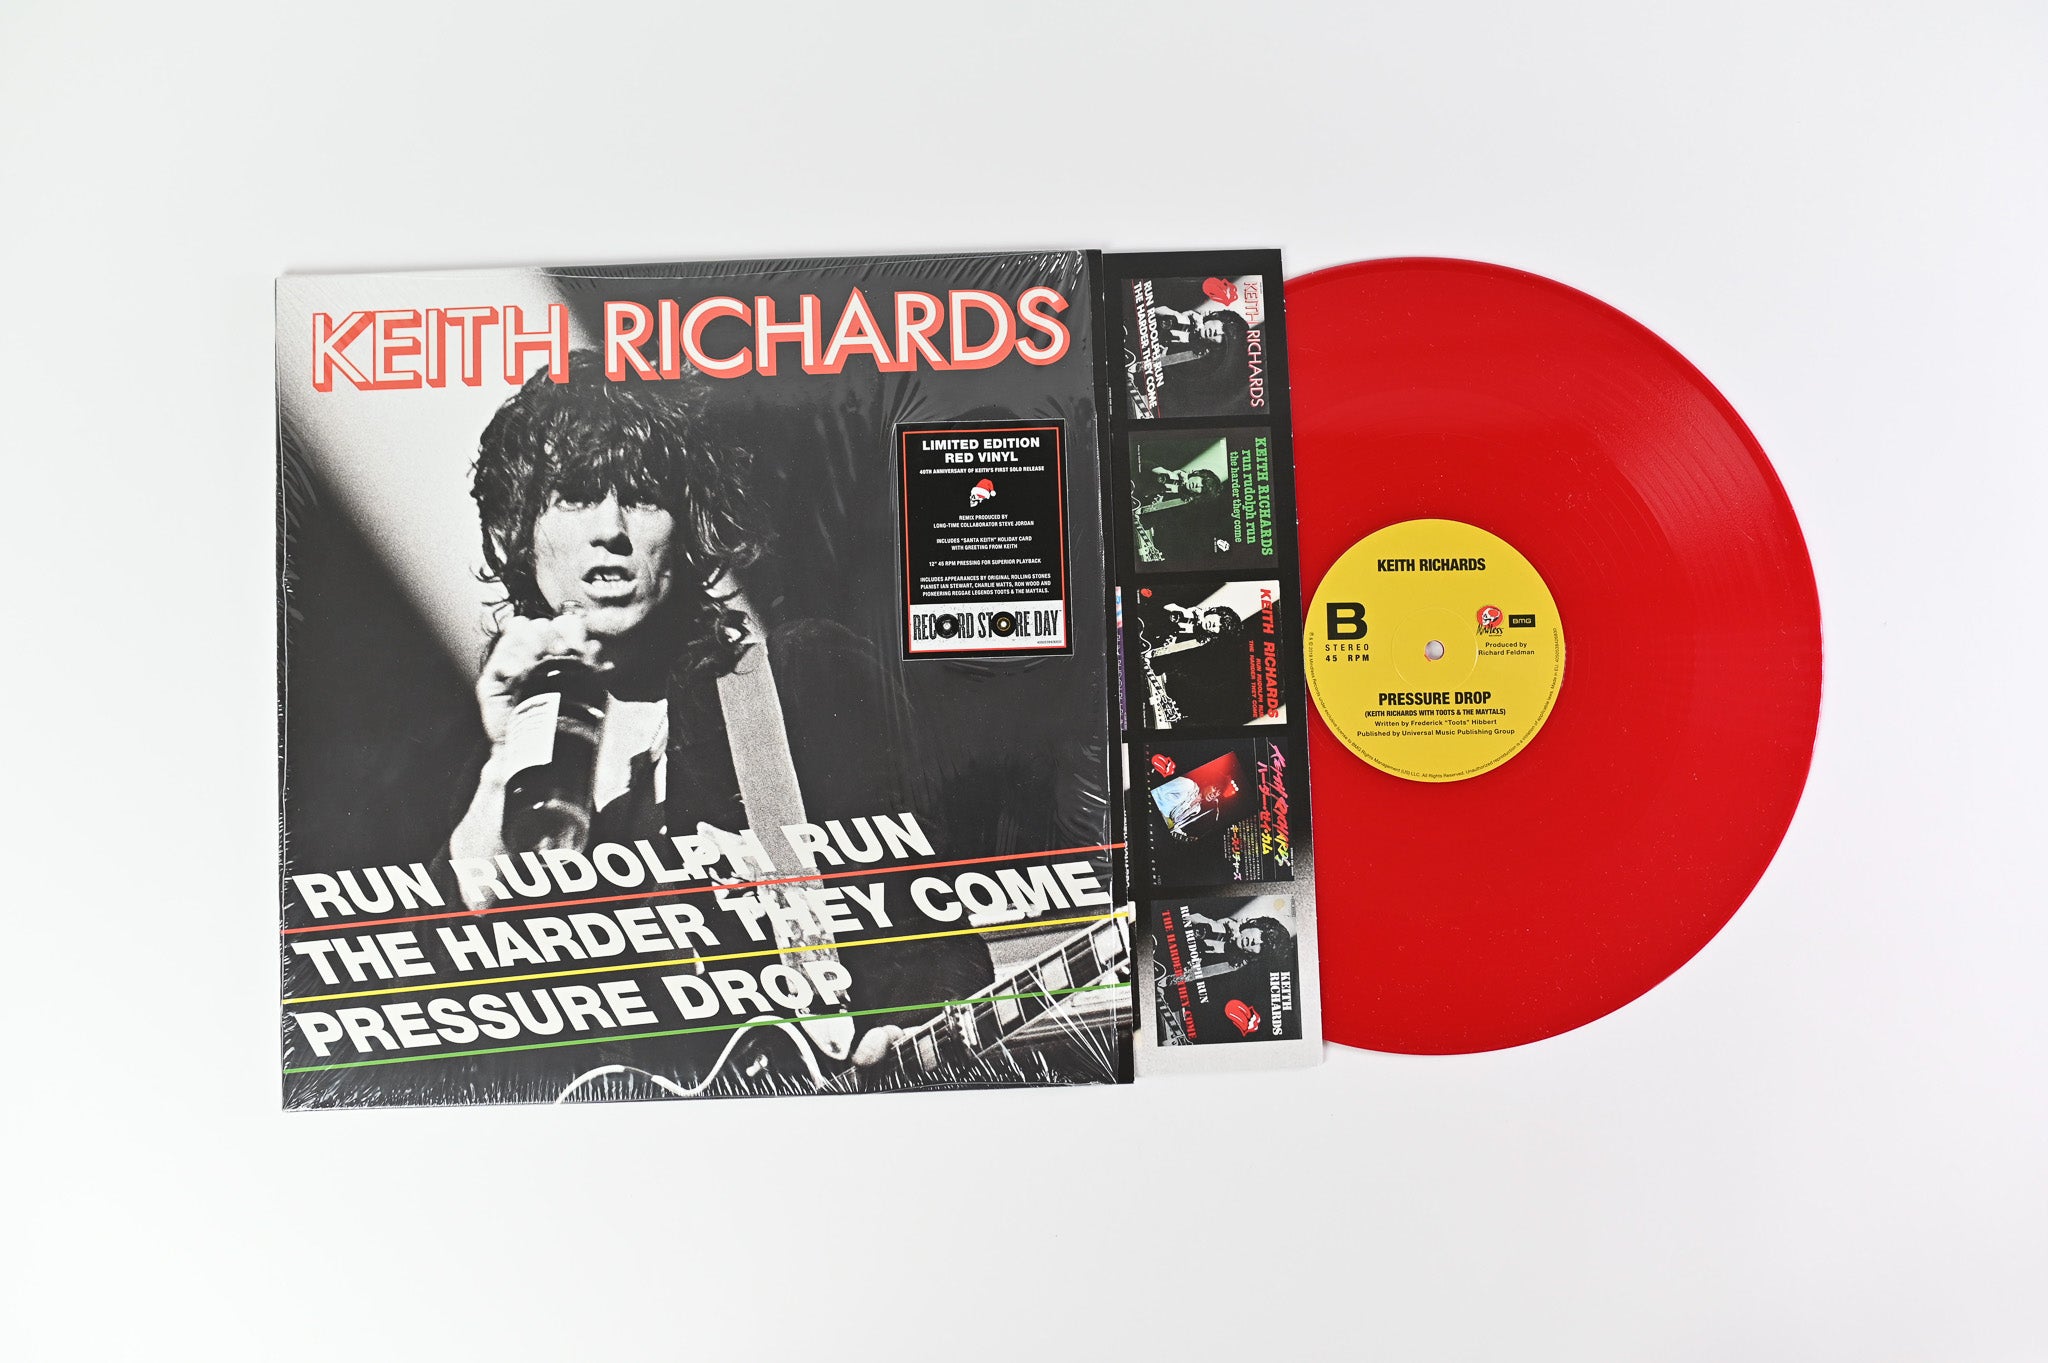 Keith Richards - Run Rudolph Run / The Harder They Come / Pressure Drop RSD BF 2018 on Mindless Records